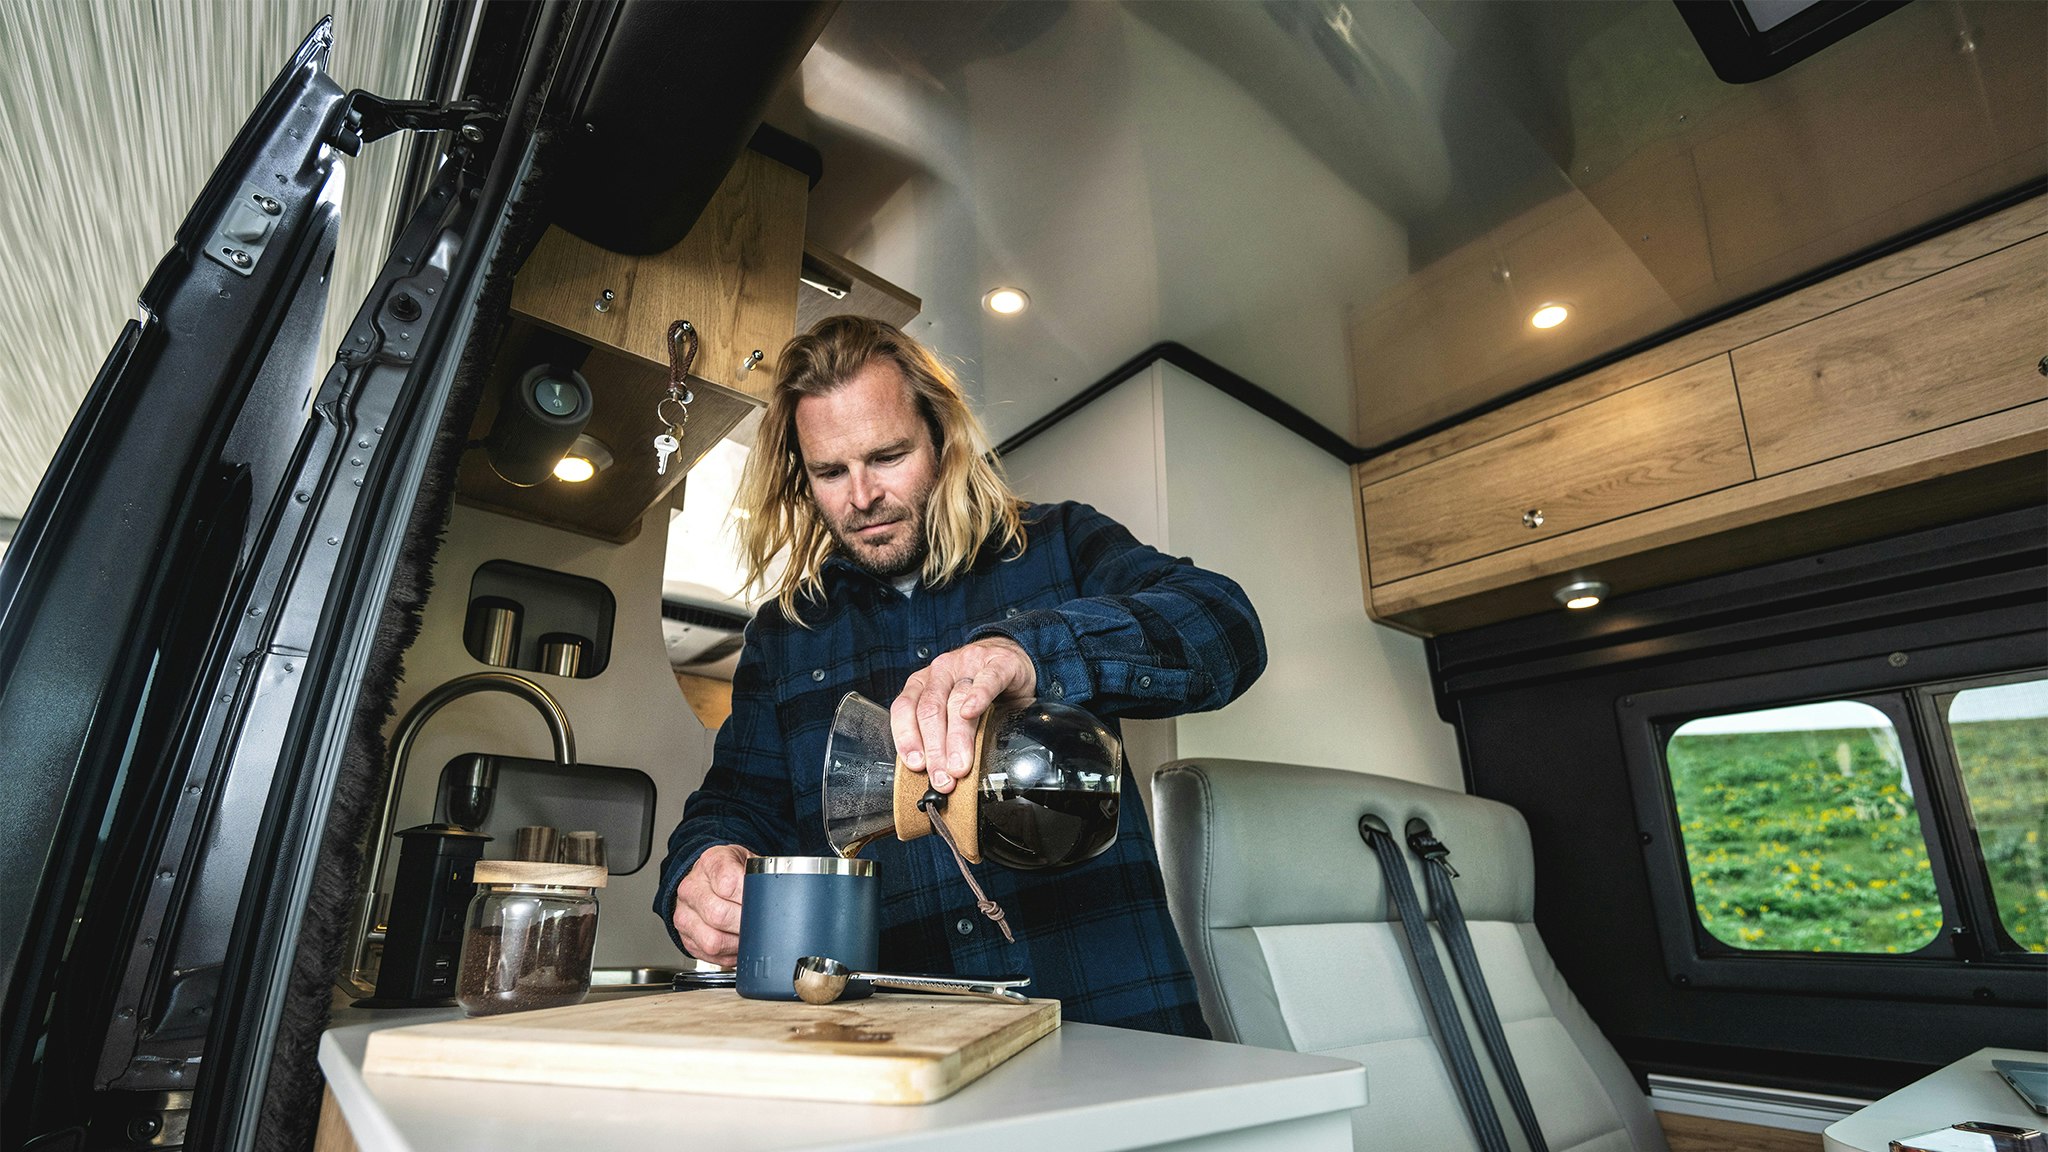 A man making coffee in the galley of his Airstream Rangeline Class B.